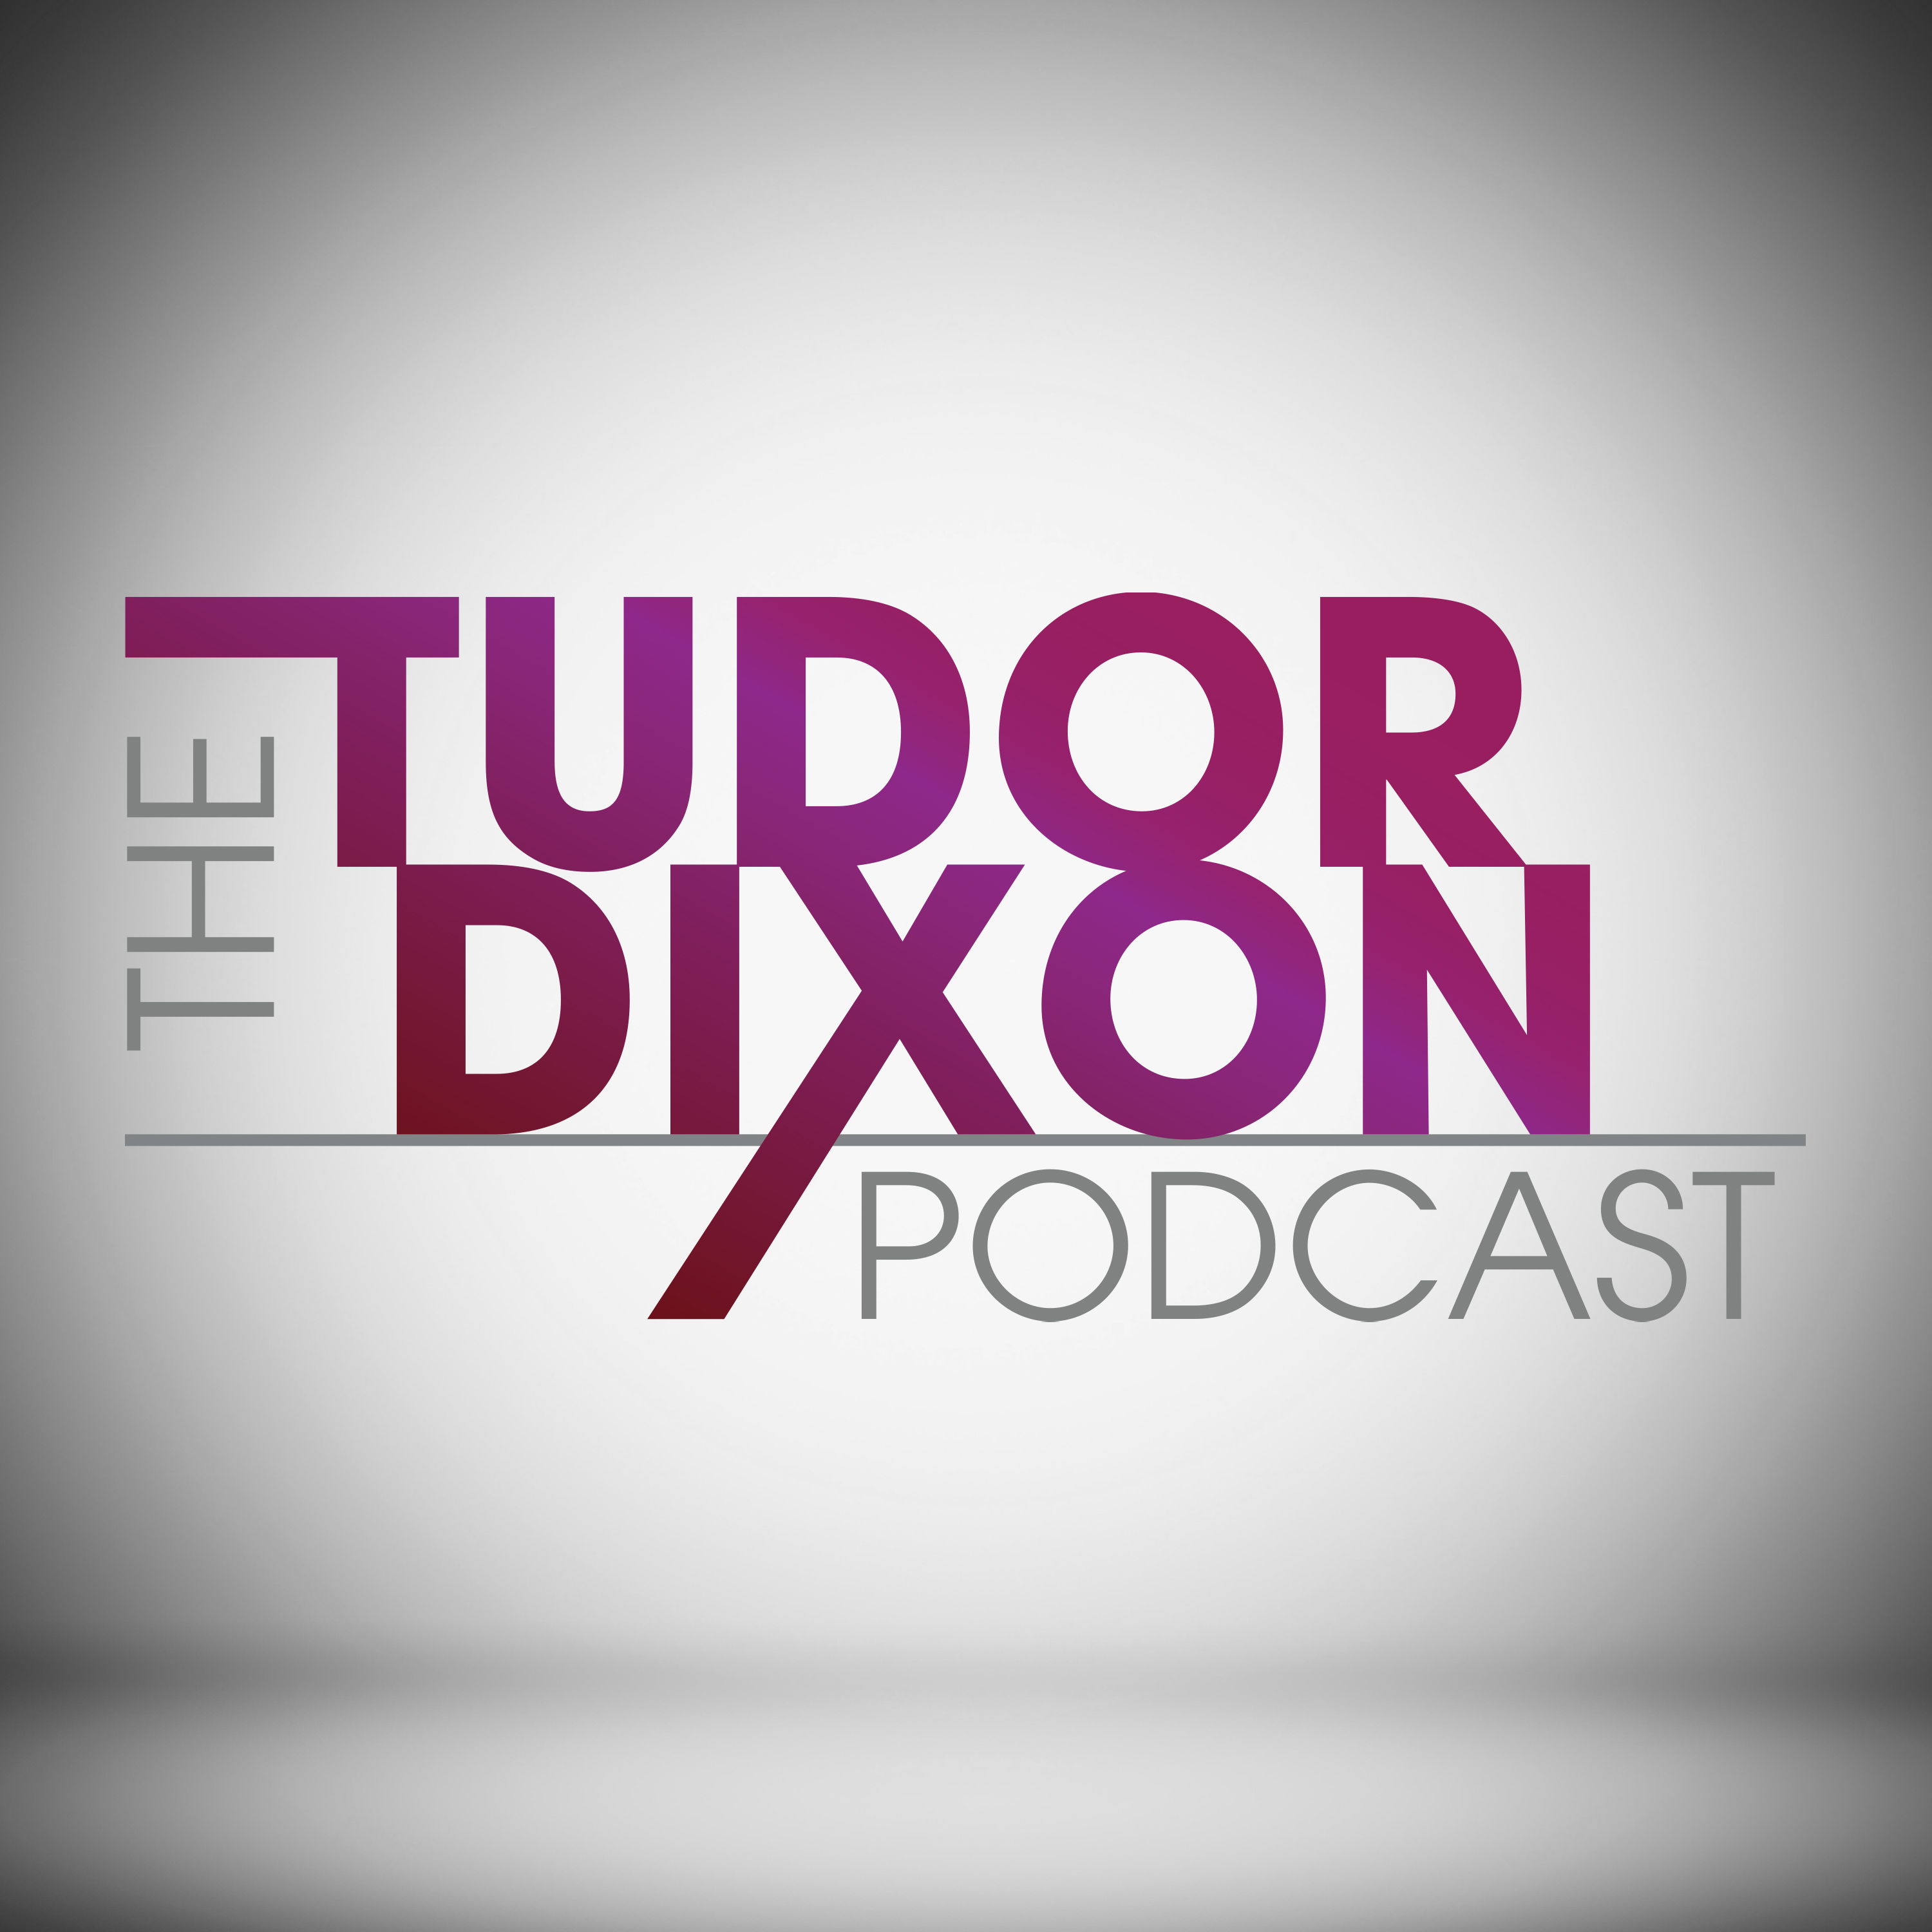 The Tudor Dixon Podcast: The Dangers of Screen Addiction with Captain Peter Ryan